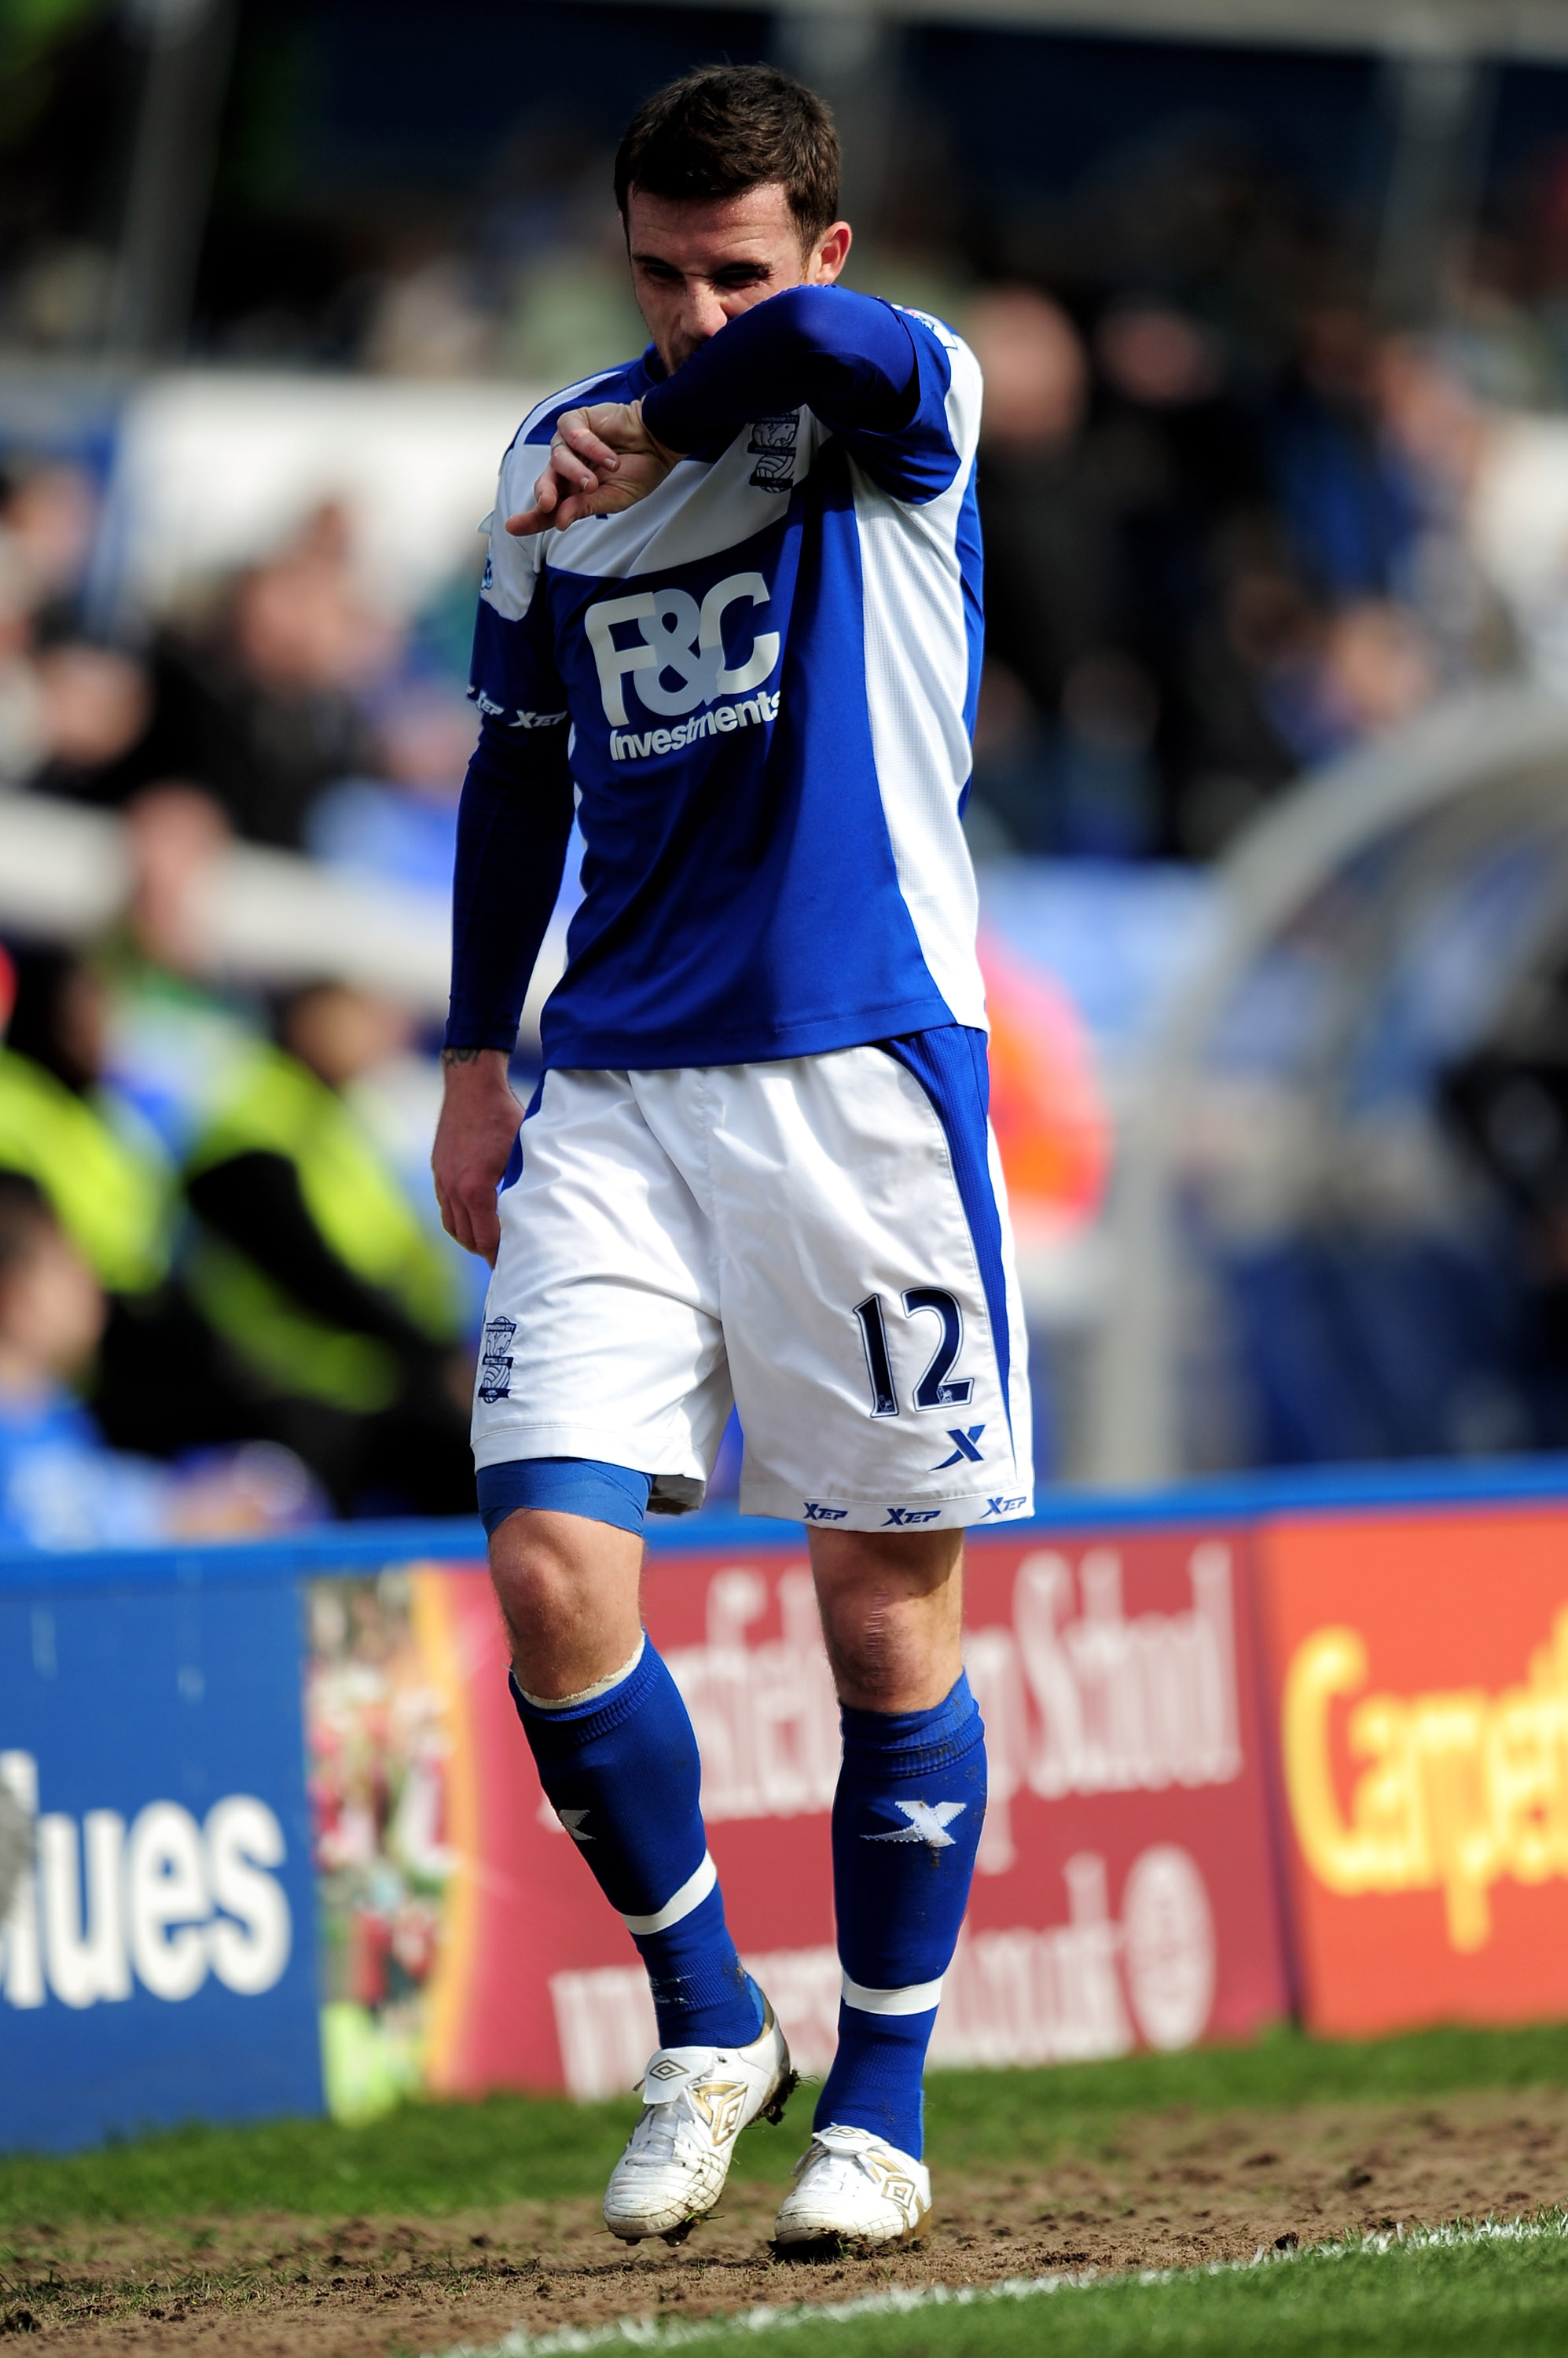 BIRMINGHAM, ENGLAND - MARCH 12:  Barry Ferguson of Birmingham City walks off after being subsituted during the FA Cup sponsored by E.On Sixth Round match between Birmingham City and Bolton Wanderers at St Andrews on March 12, 2011 in Birmingham, England.